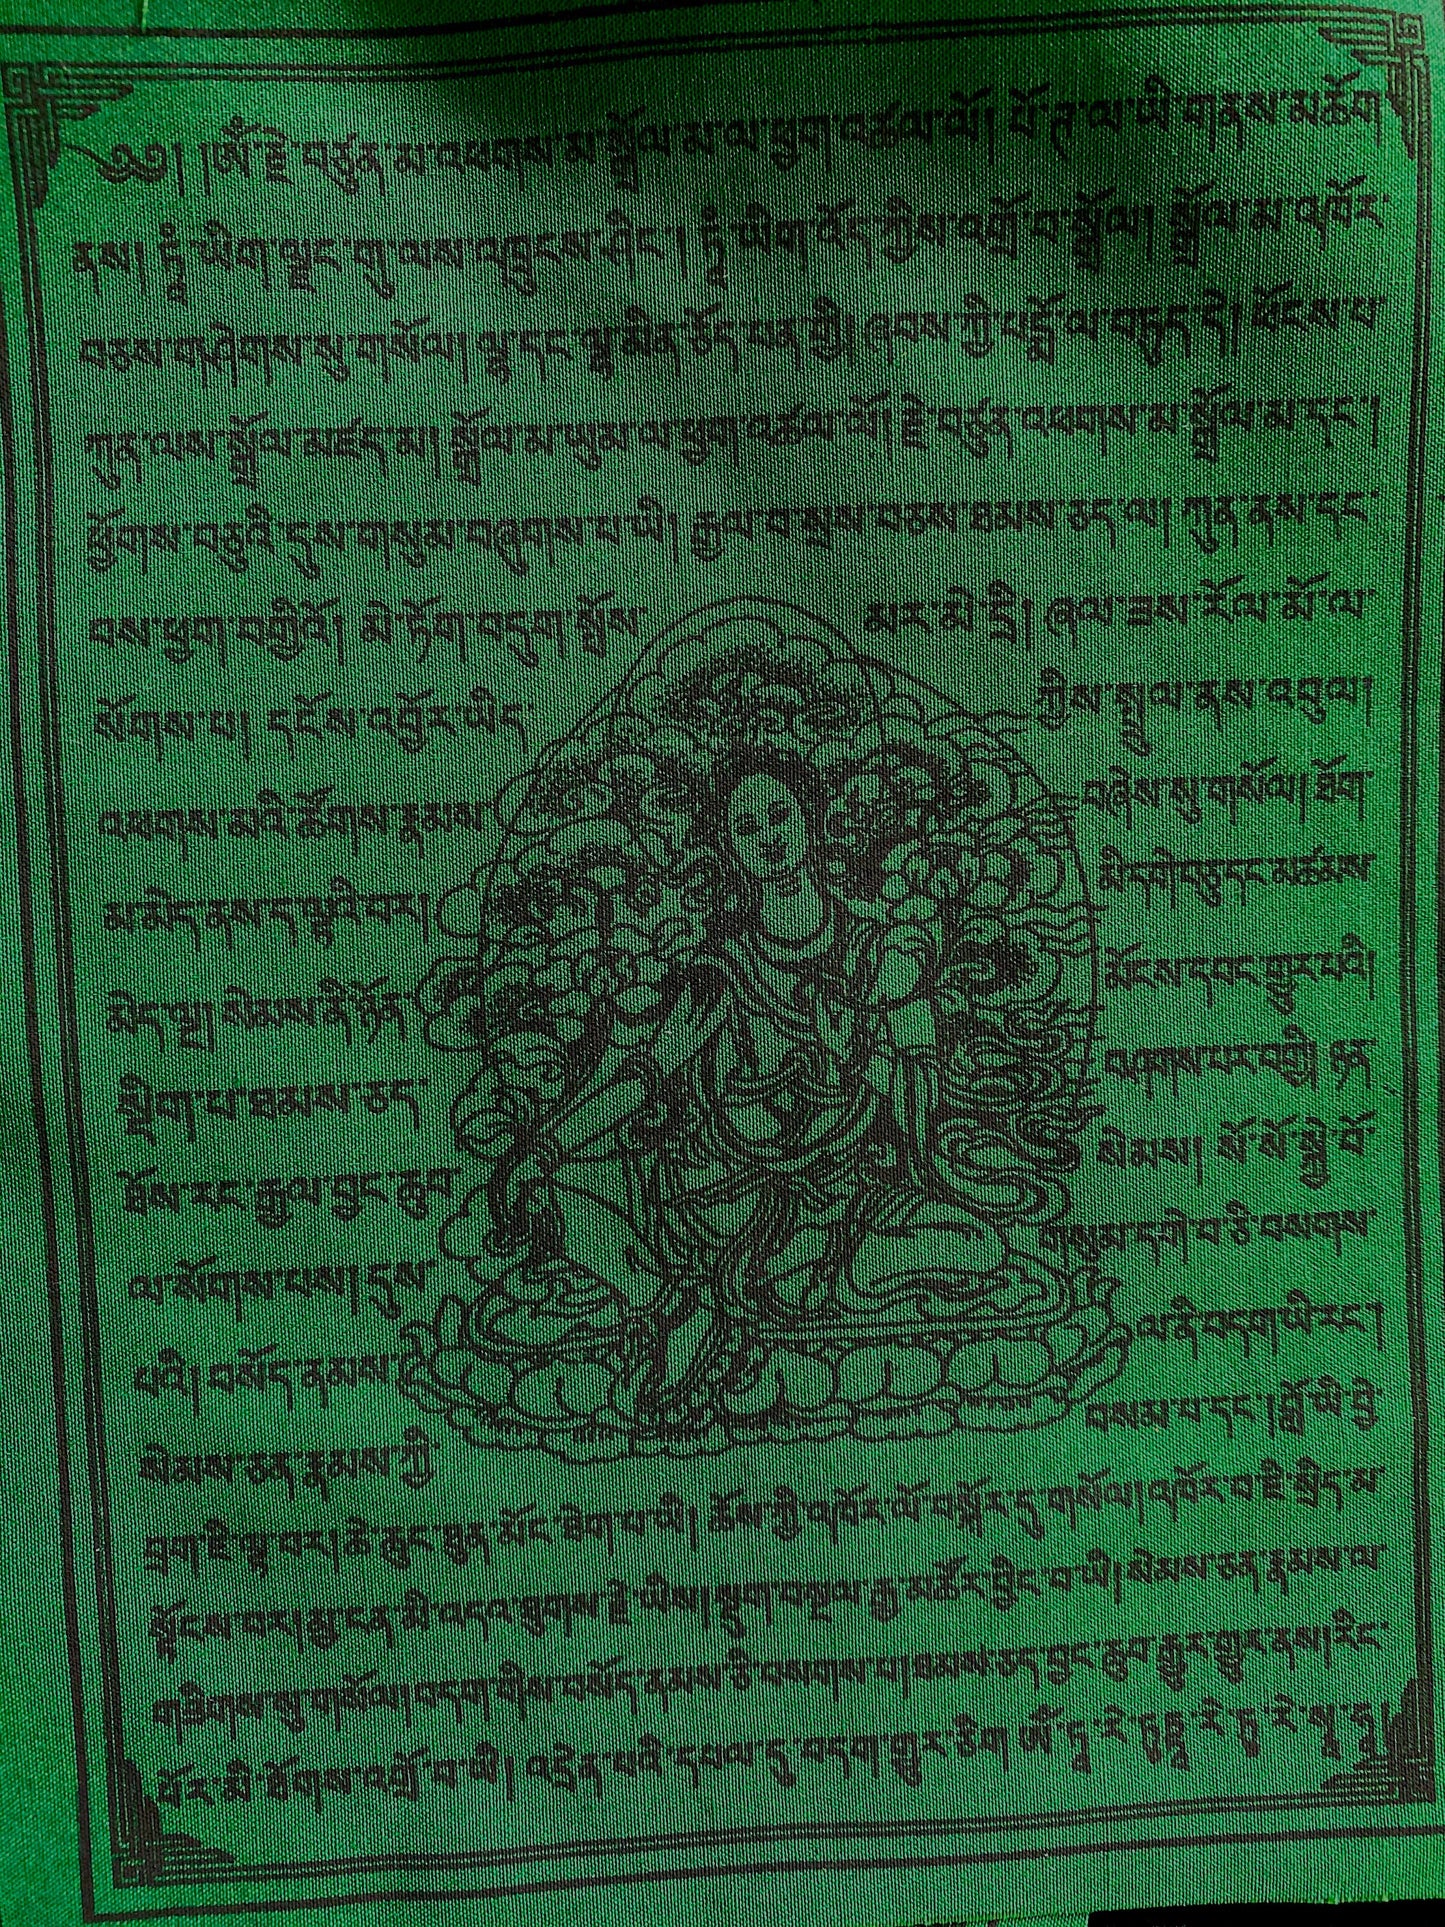 A Green Tara flag from 10-flag strand of high-quality Tibetan prayer flags. Measuring 6x7.5 inches, imprinted with black ink, ideal for indoor/outdoor use.